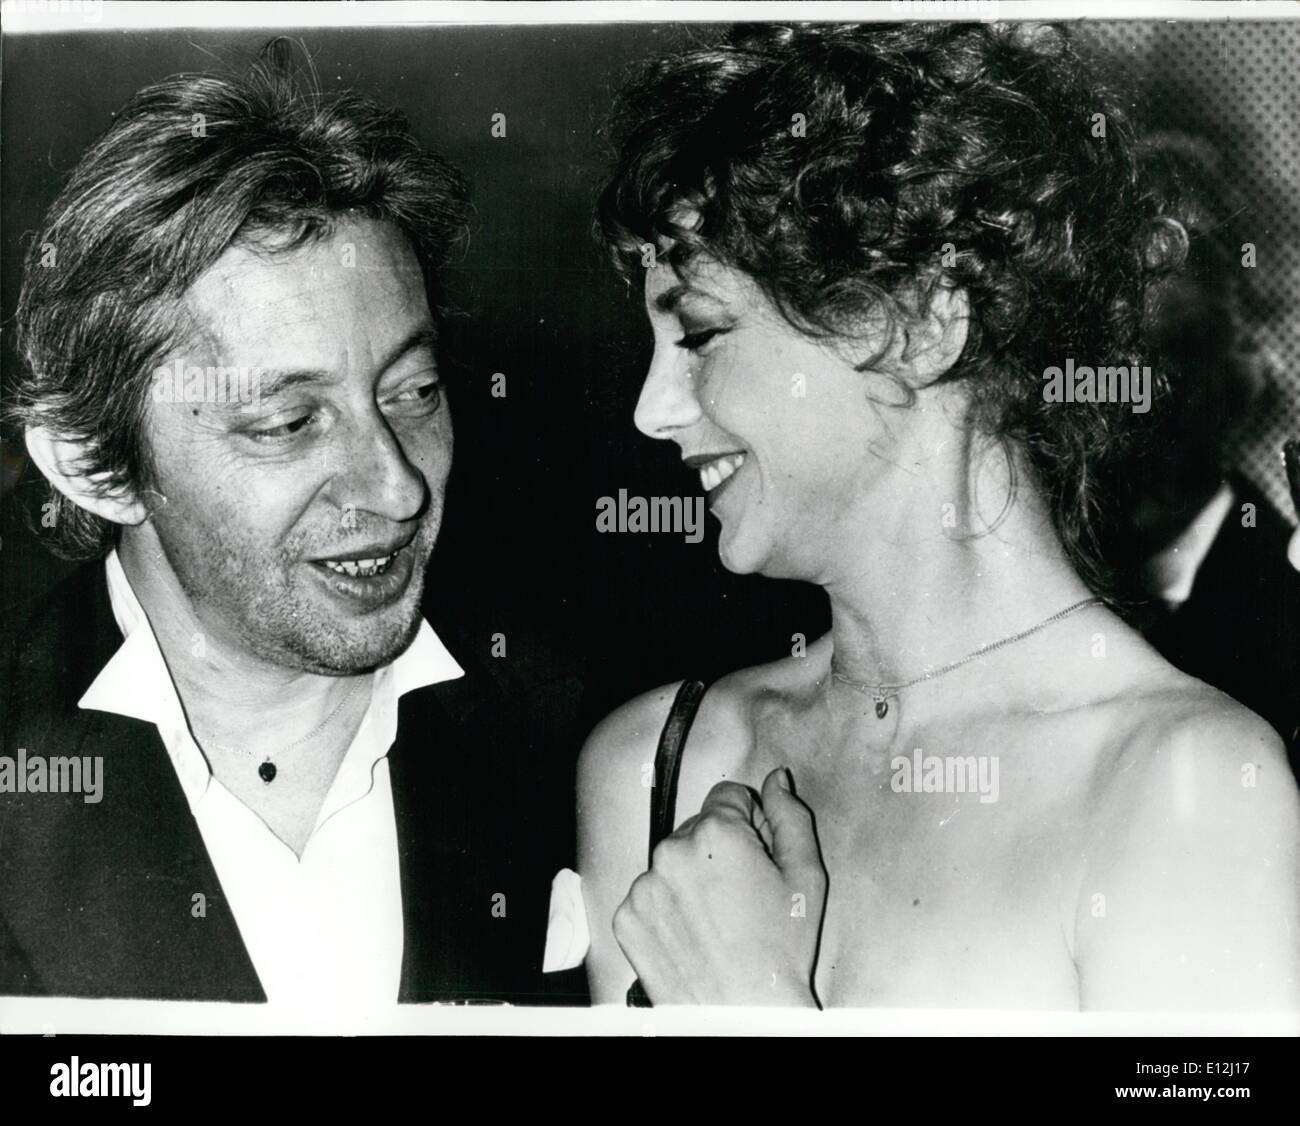 Jan. 09, 2012 - French Star celebrates 20 years as a singer. 50-year old French star Serge Gainsbourg celebrated his 20th year as a singer and composer recently at a fete in Paris, to mark his successful career in the world of French discs. Photo Shows: The singer Serge Gainsbourg with his wife, Jane Birkin, a singer and comedienne, at the celebrations in Paris recently. T/Keystone Stock Photo